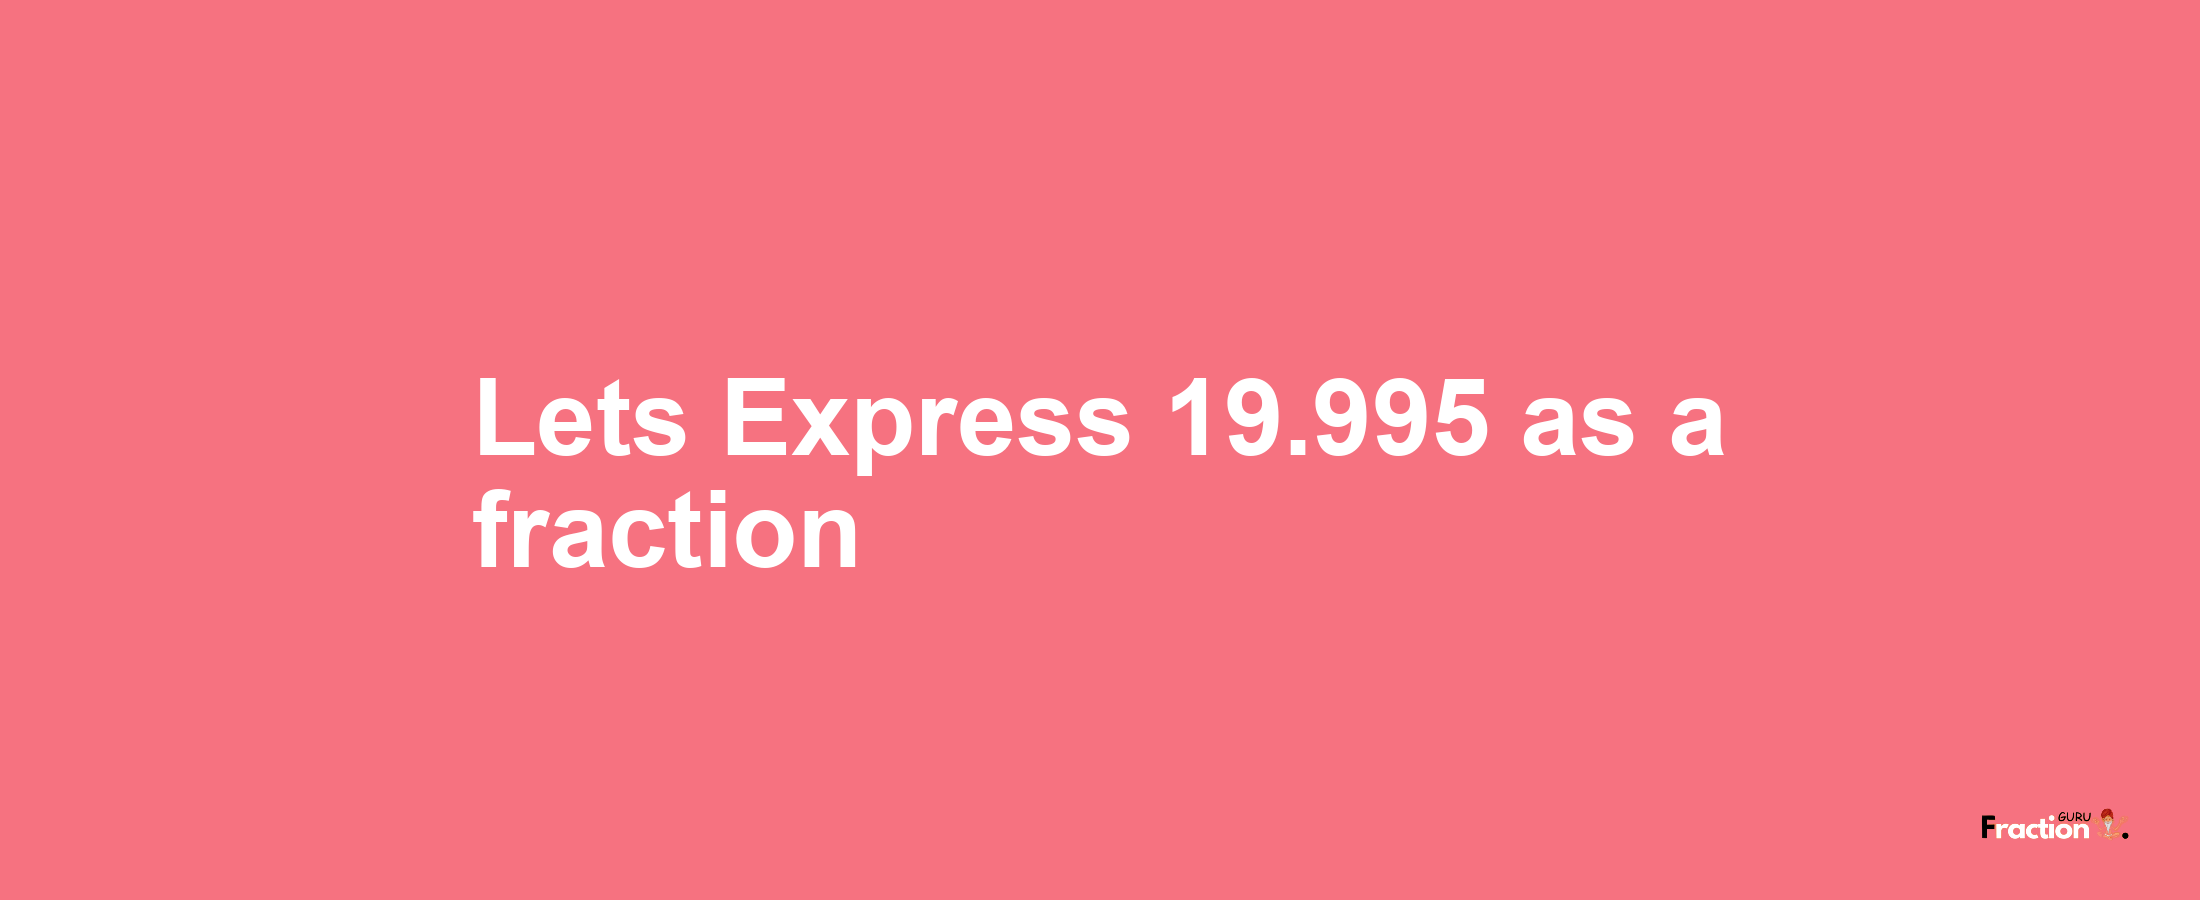 Lets Express 19.995 as afraction